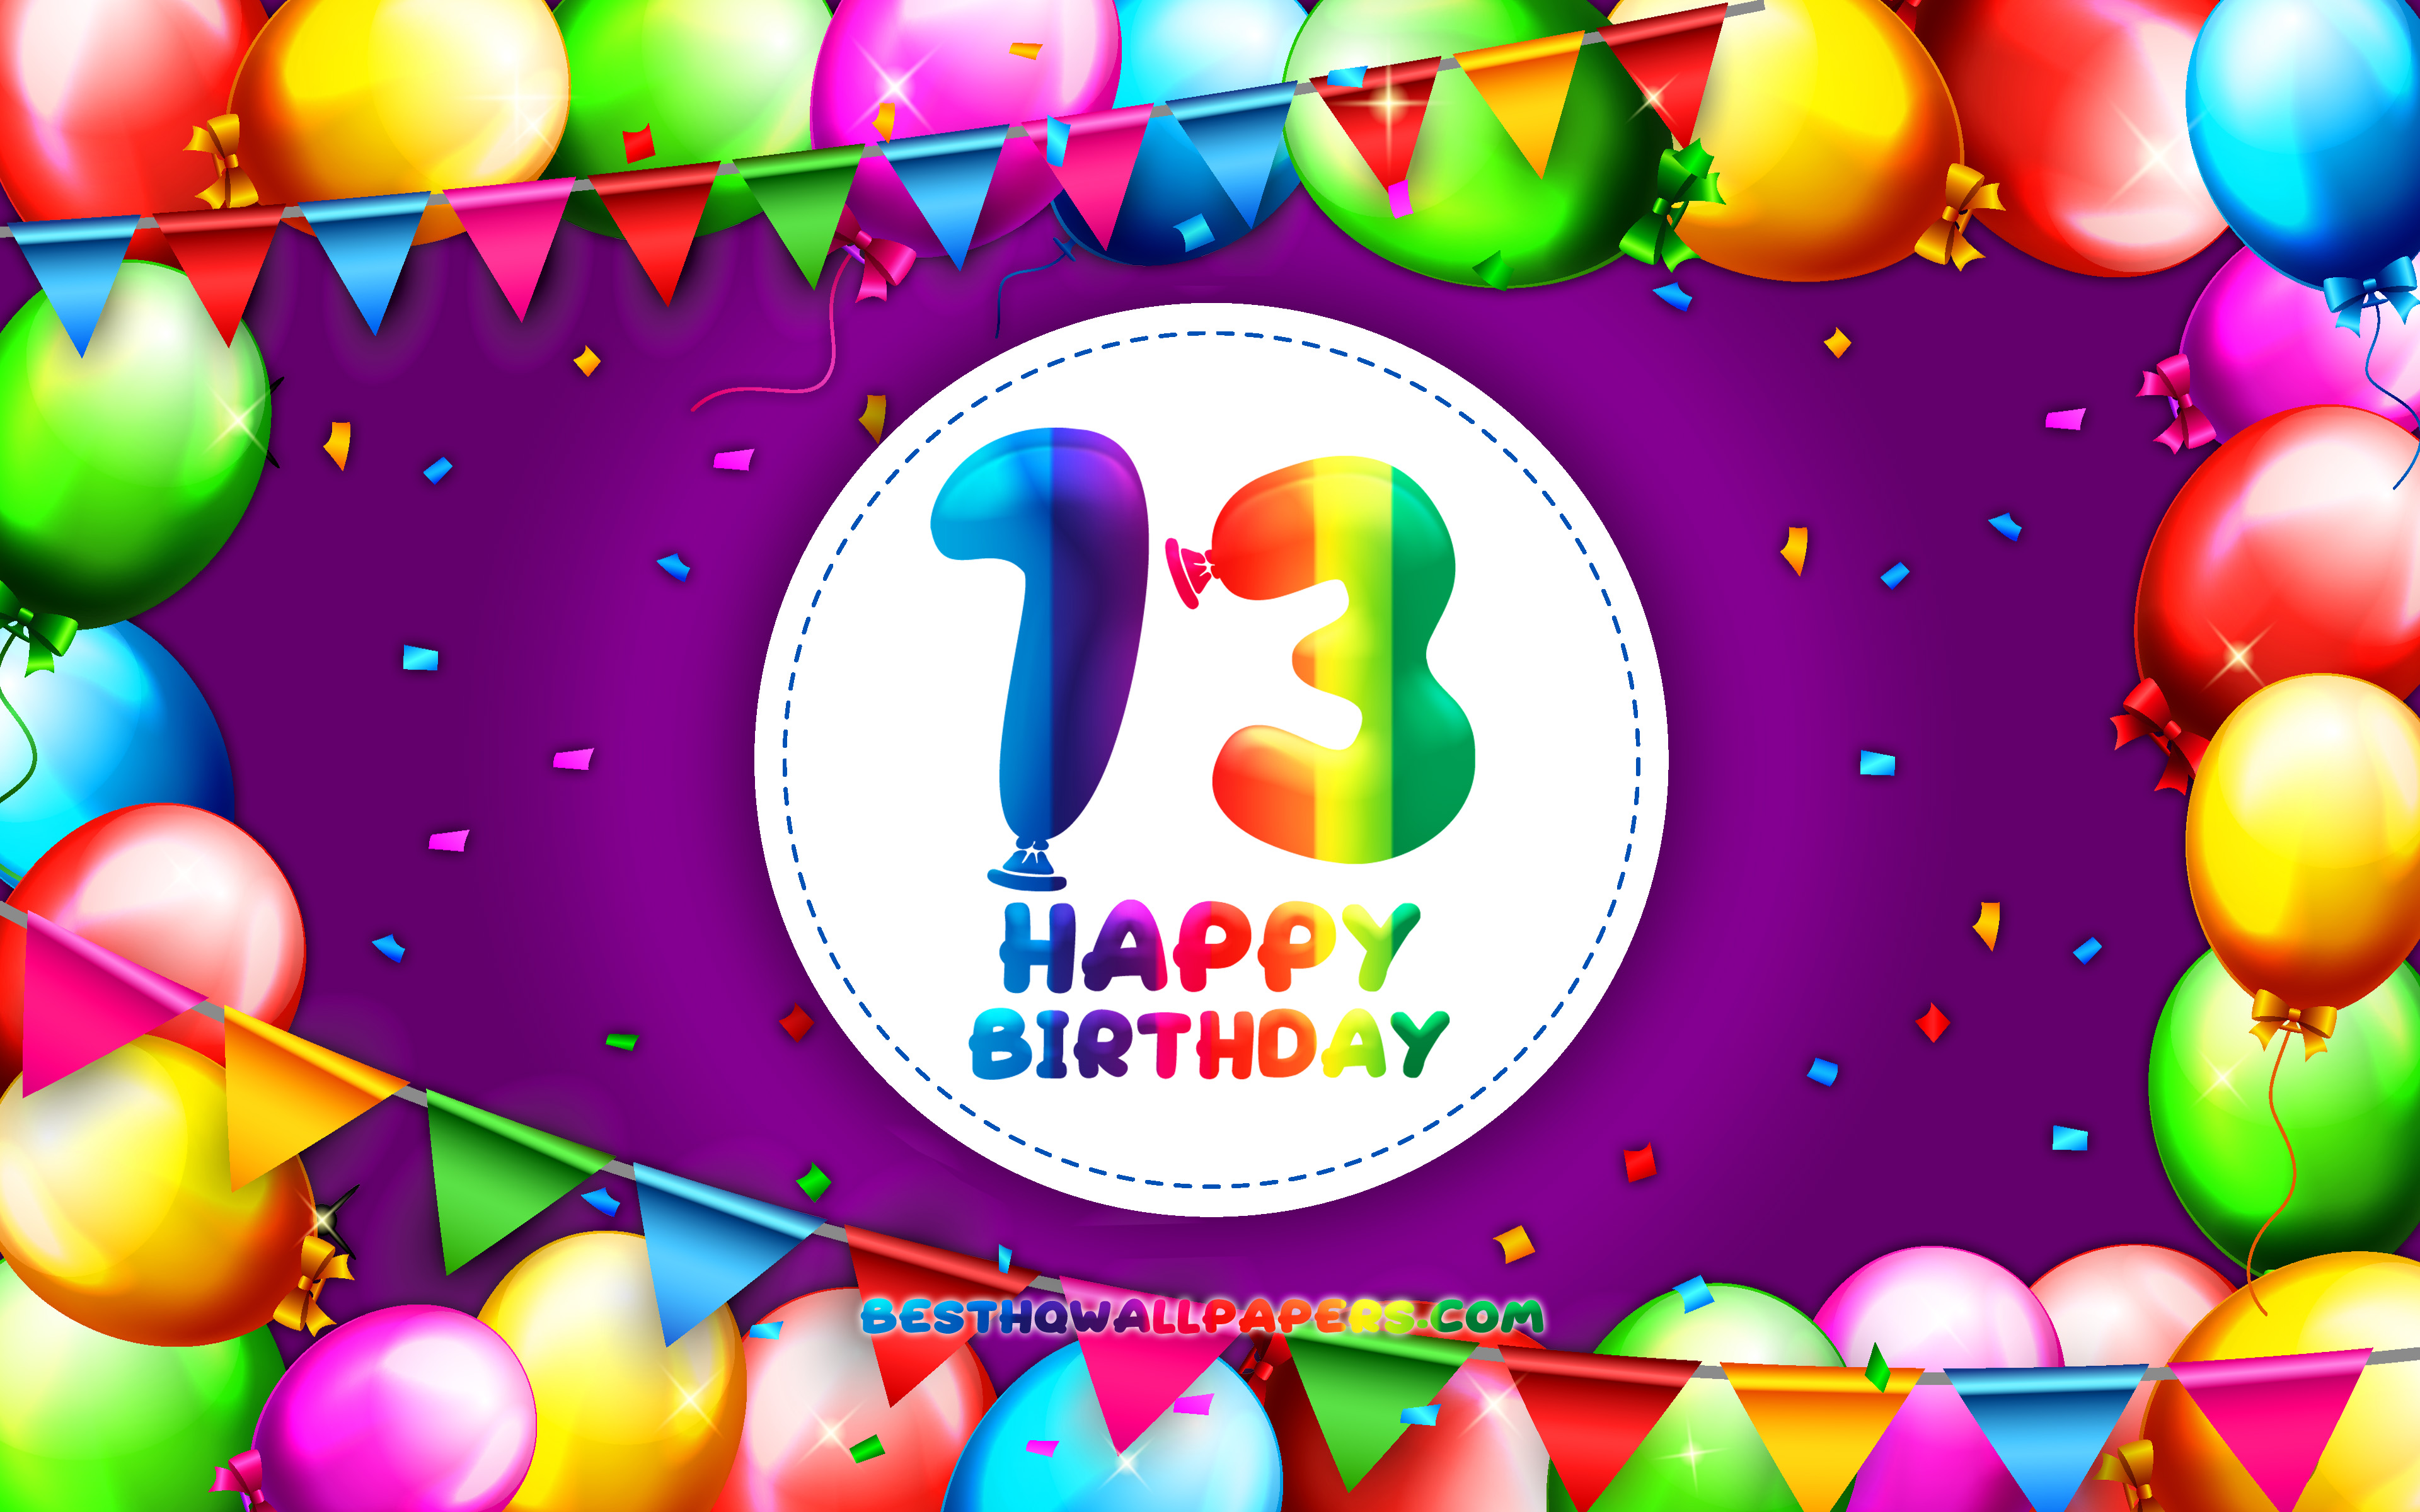 Download wallpapers Happy 13th birthday, 4k, colorful.